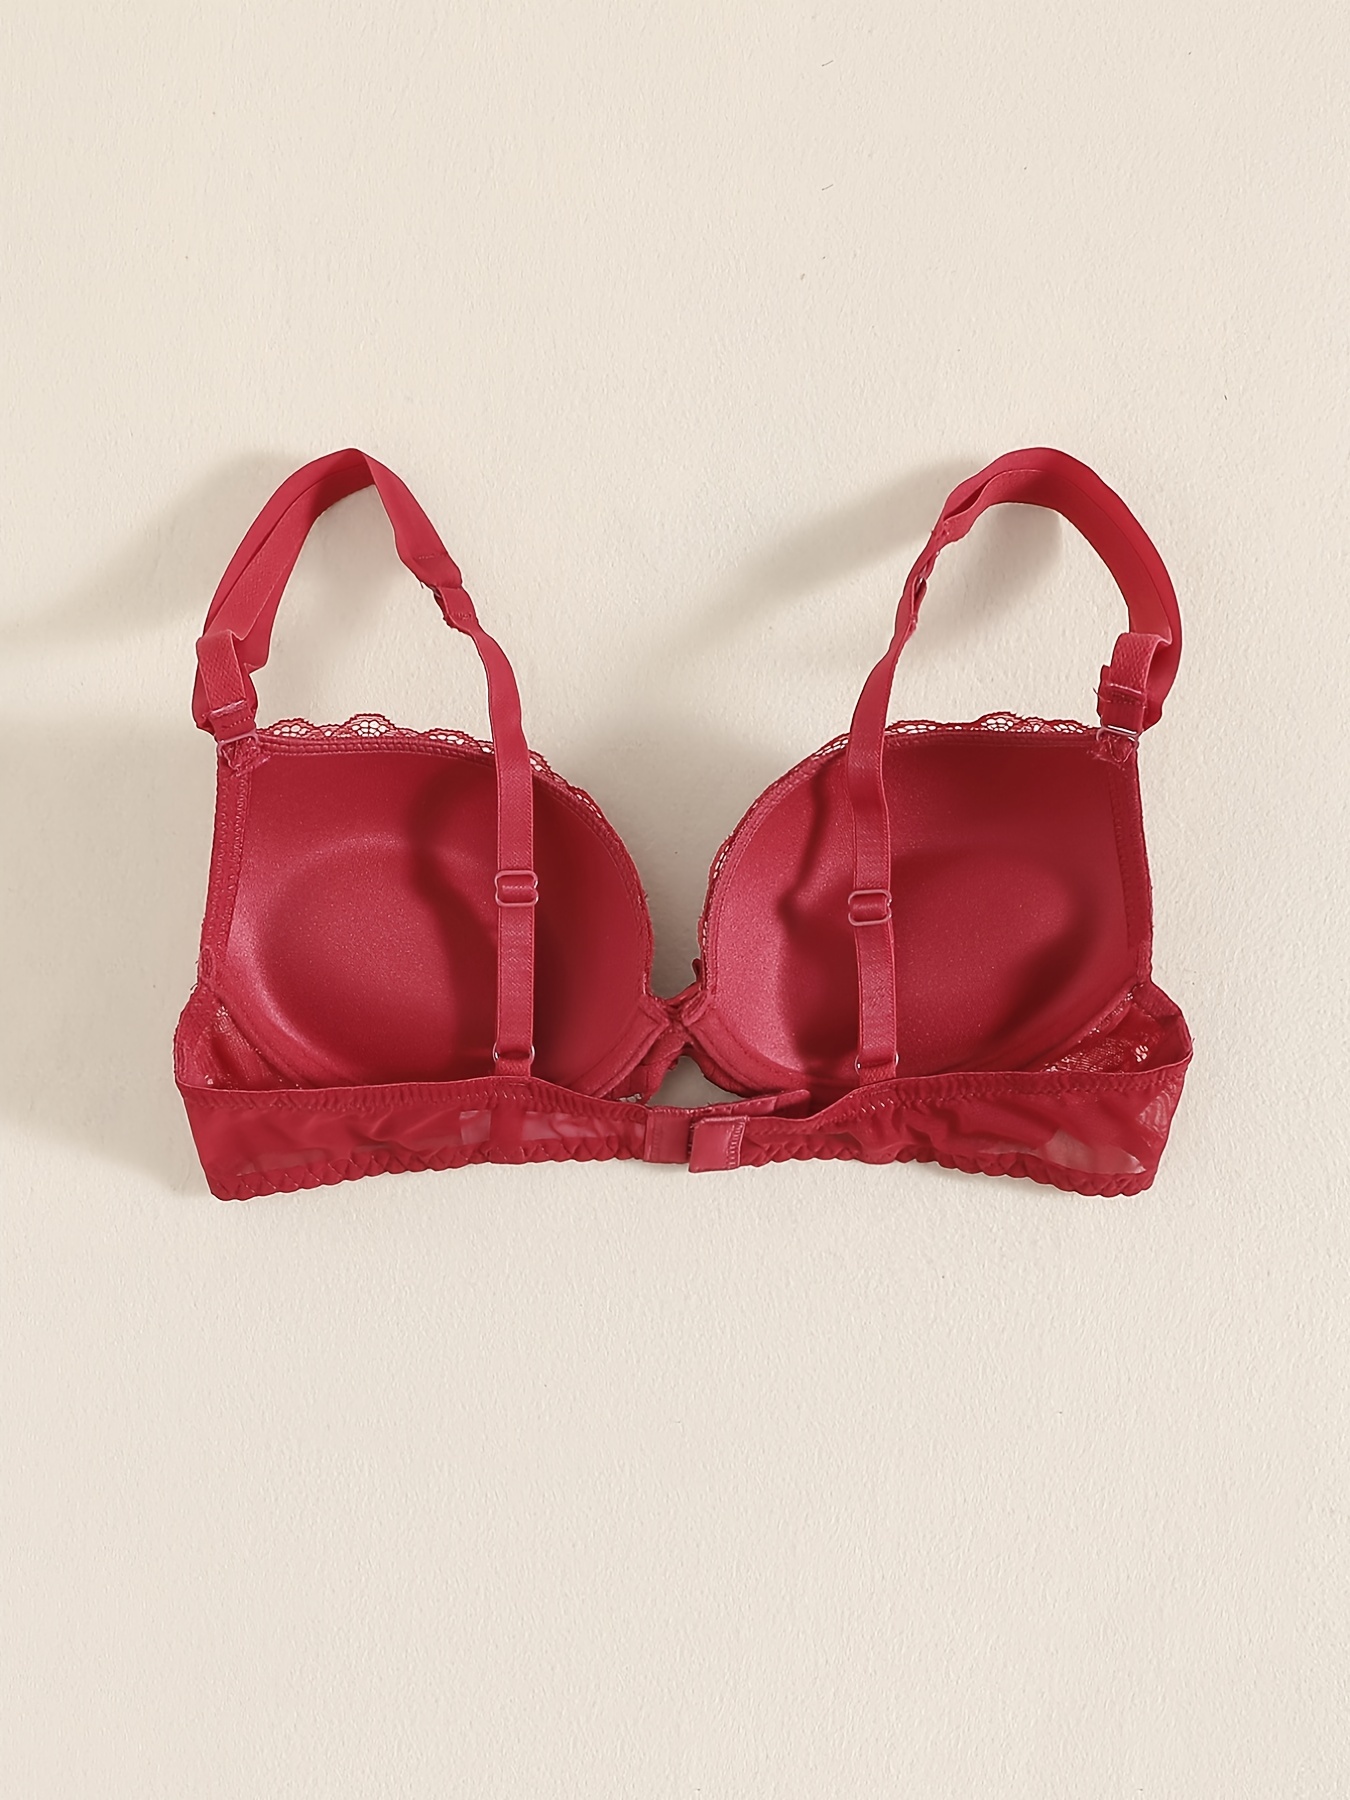 Victoria's Secret Red Lace Push Up Bra Size 34B - $24 - From